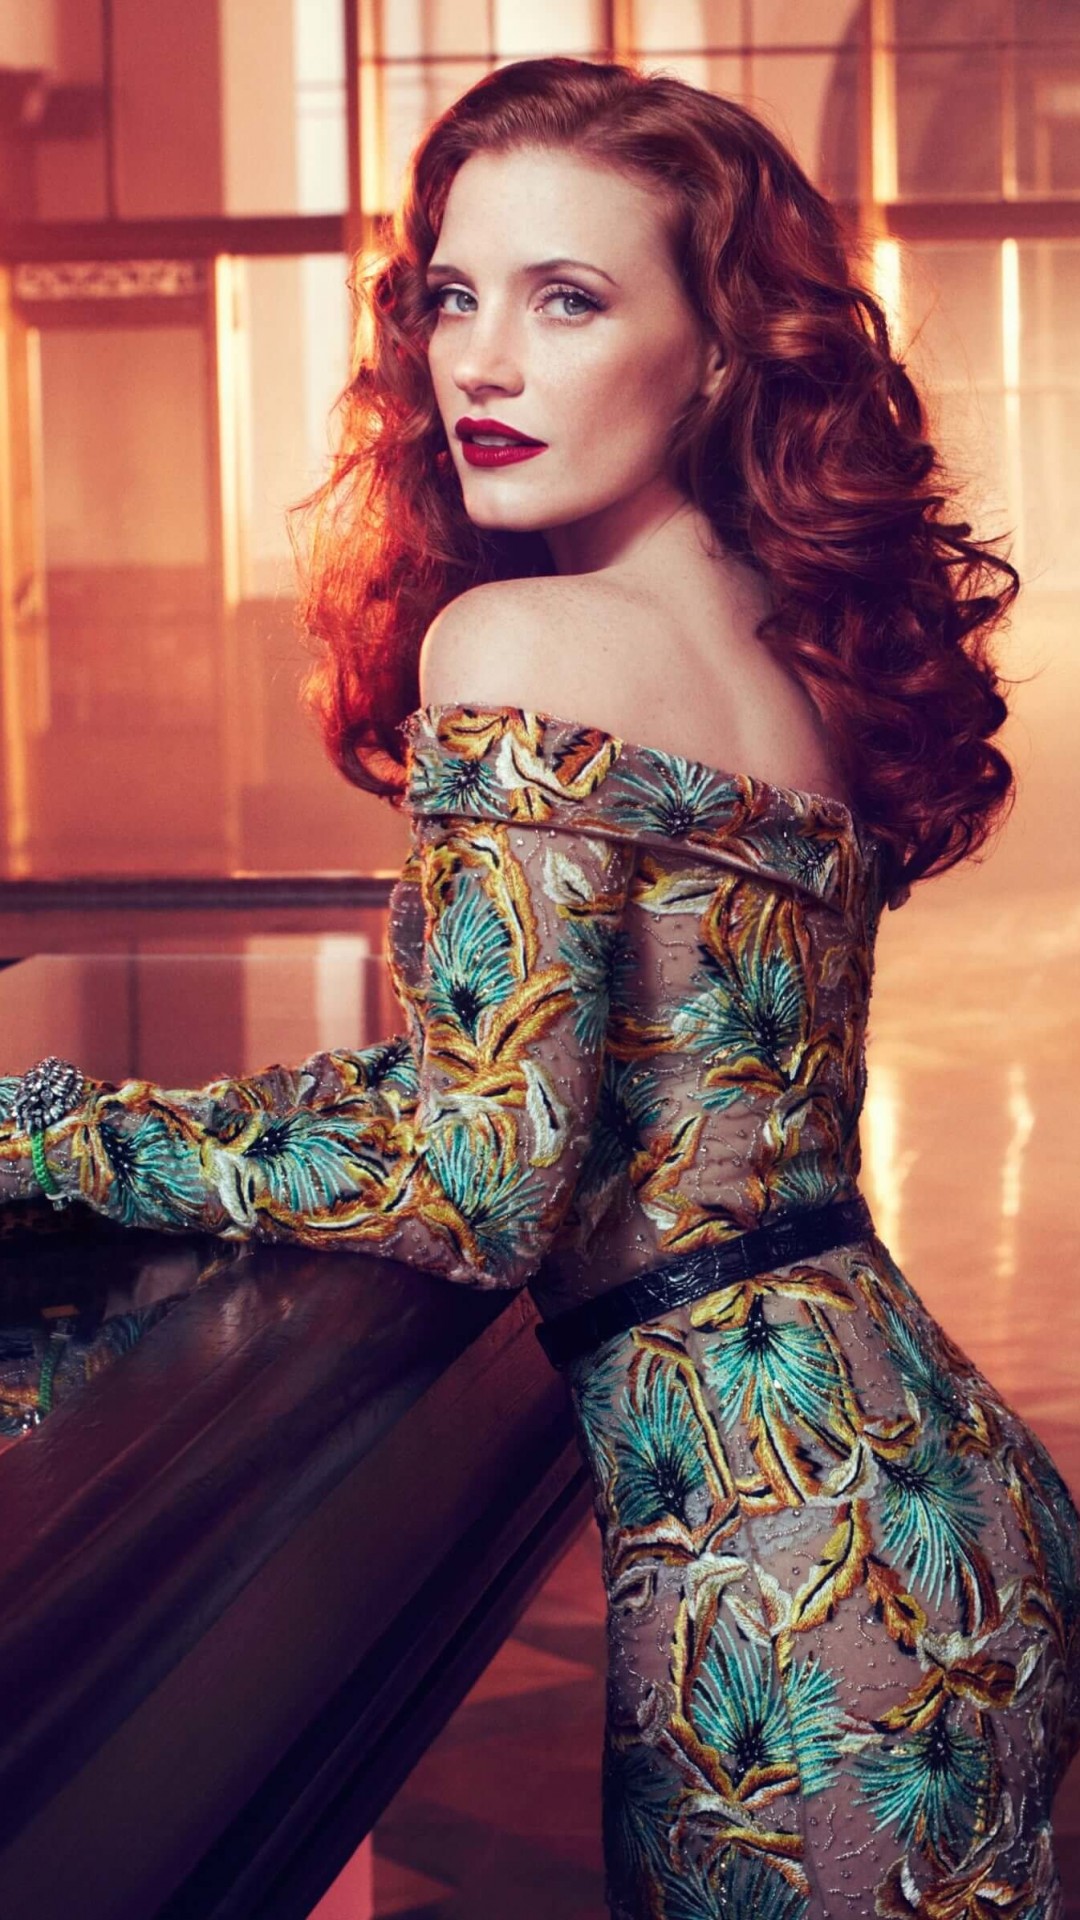 Jessica Chastain Wallpaper for SAMSUNG Galaxy S4